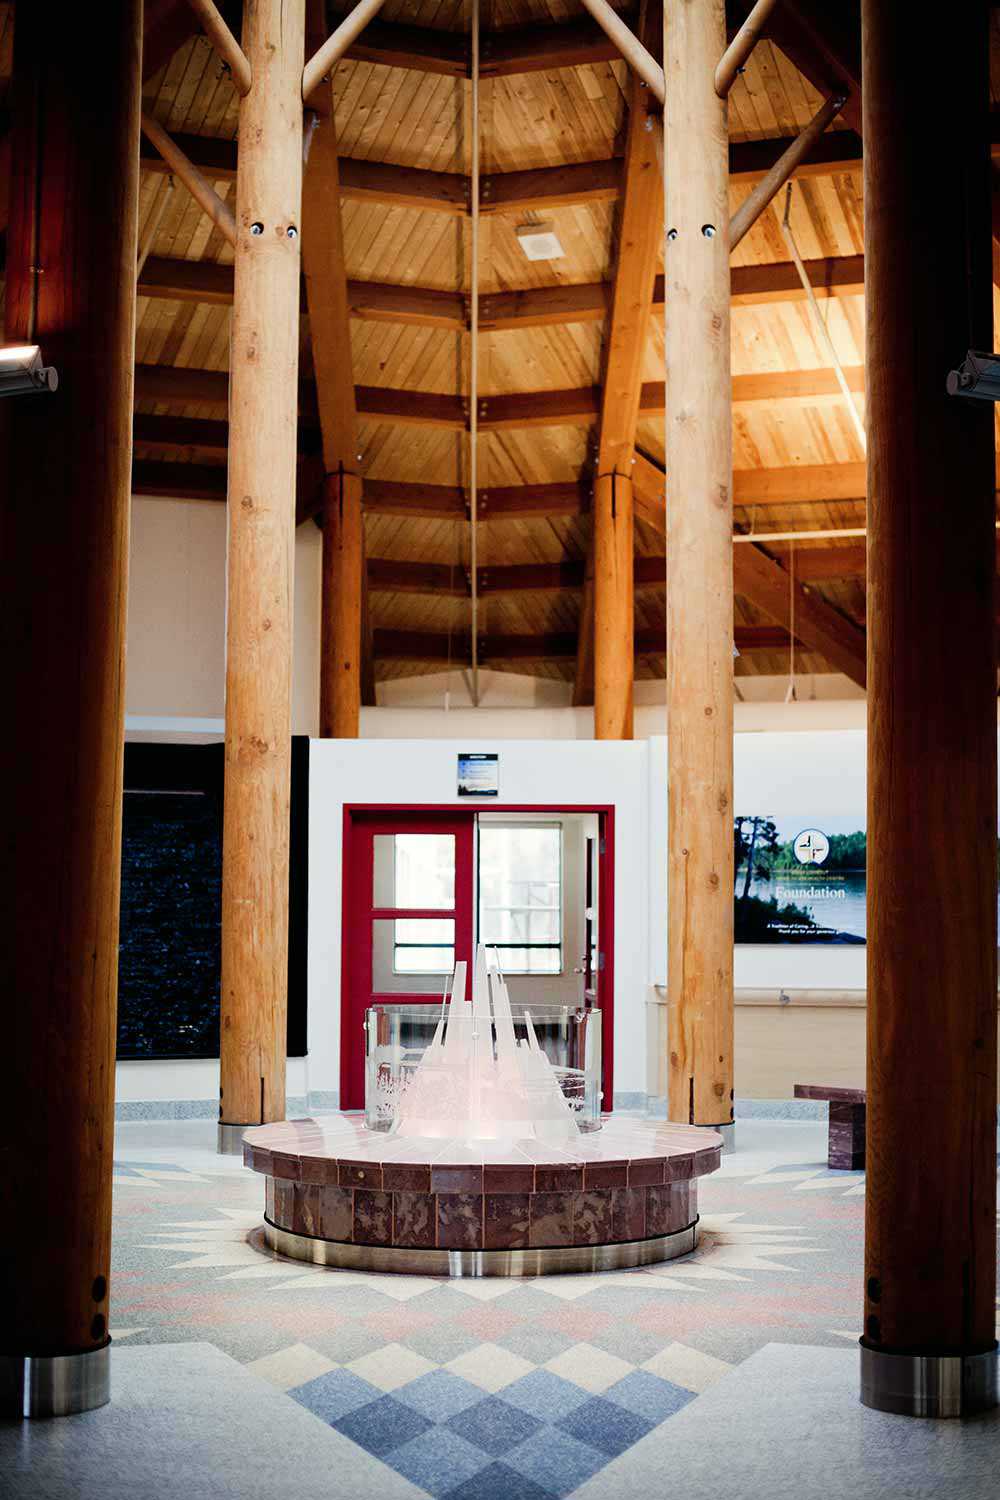 The Gathering Area in the Sioux Lookout Meno Ya Win Health Centre (SLMHC) is designed to suggest a clearing in a forest, a lodge or longhouse, with a fireplace that symbolizes unity with the community. Photo used with permission of the SLMHC.